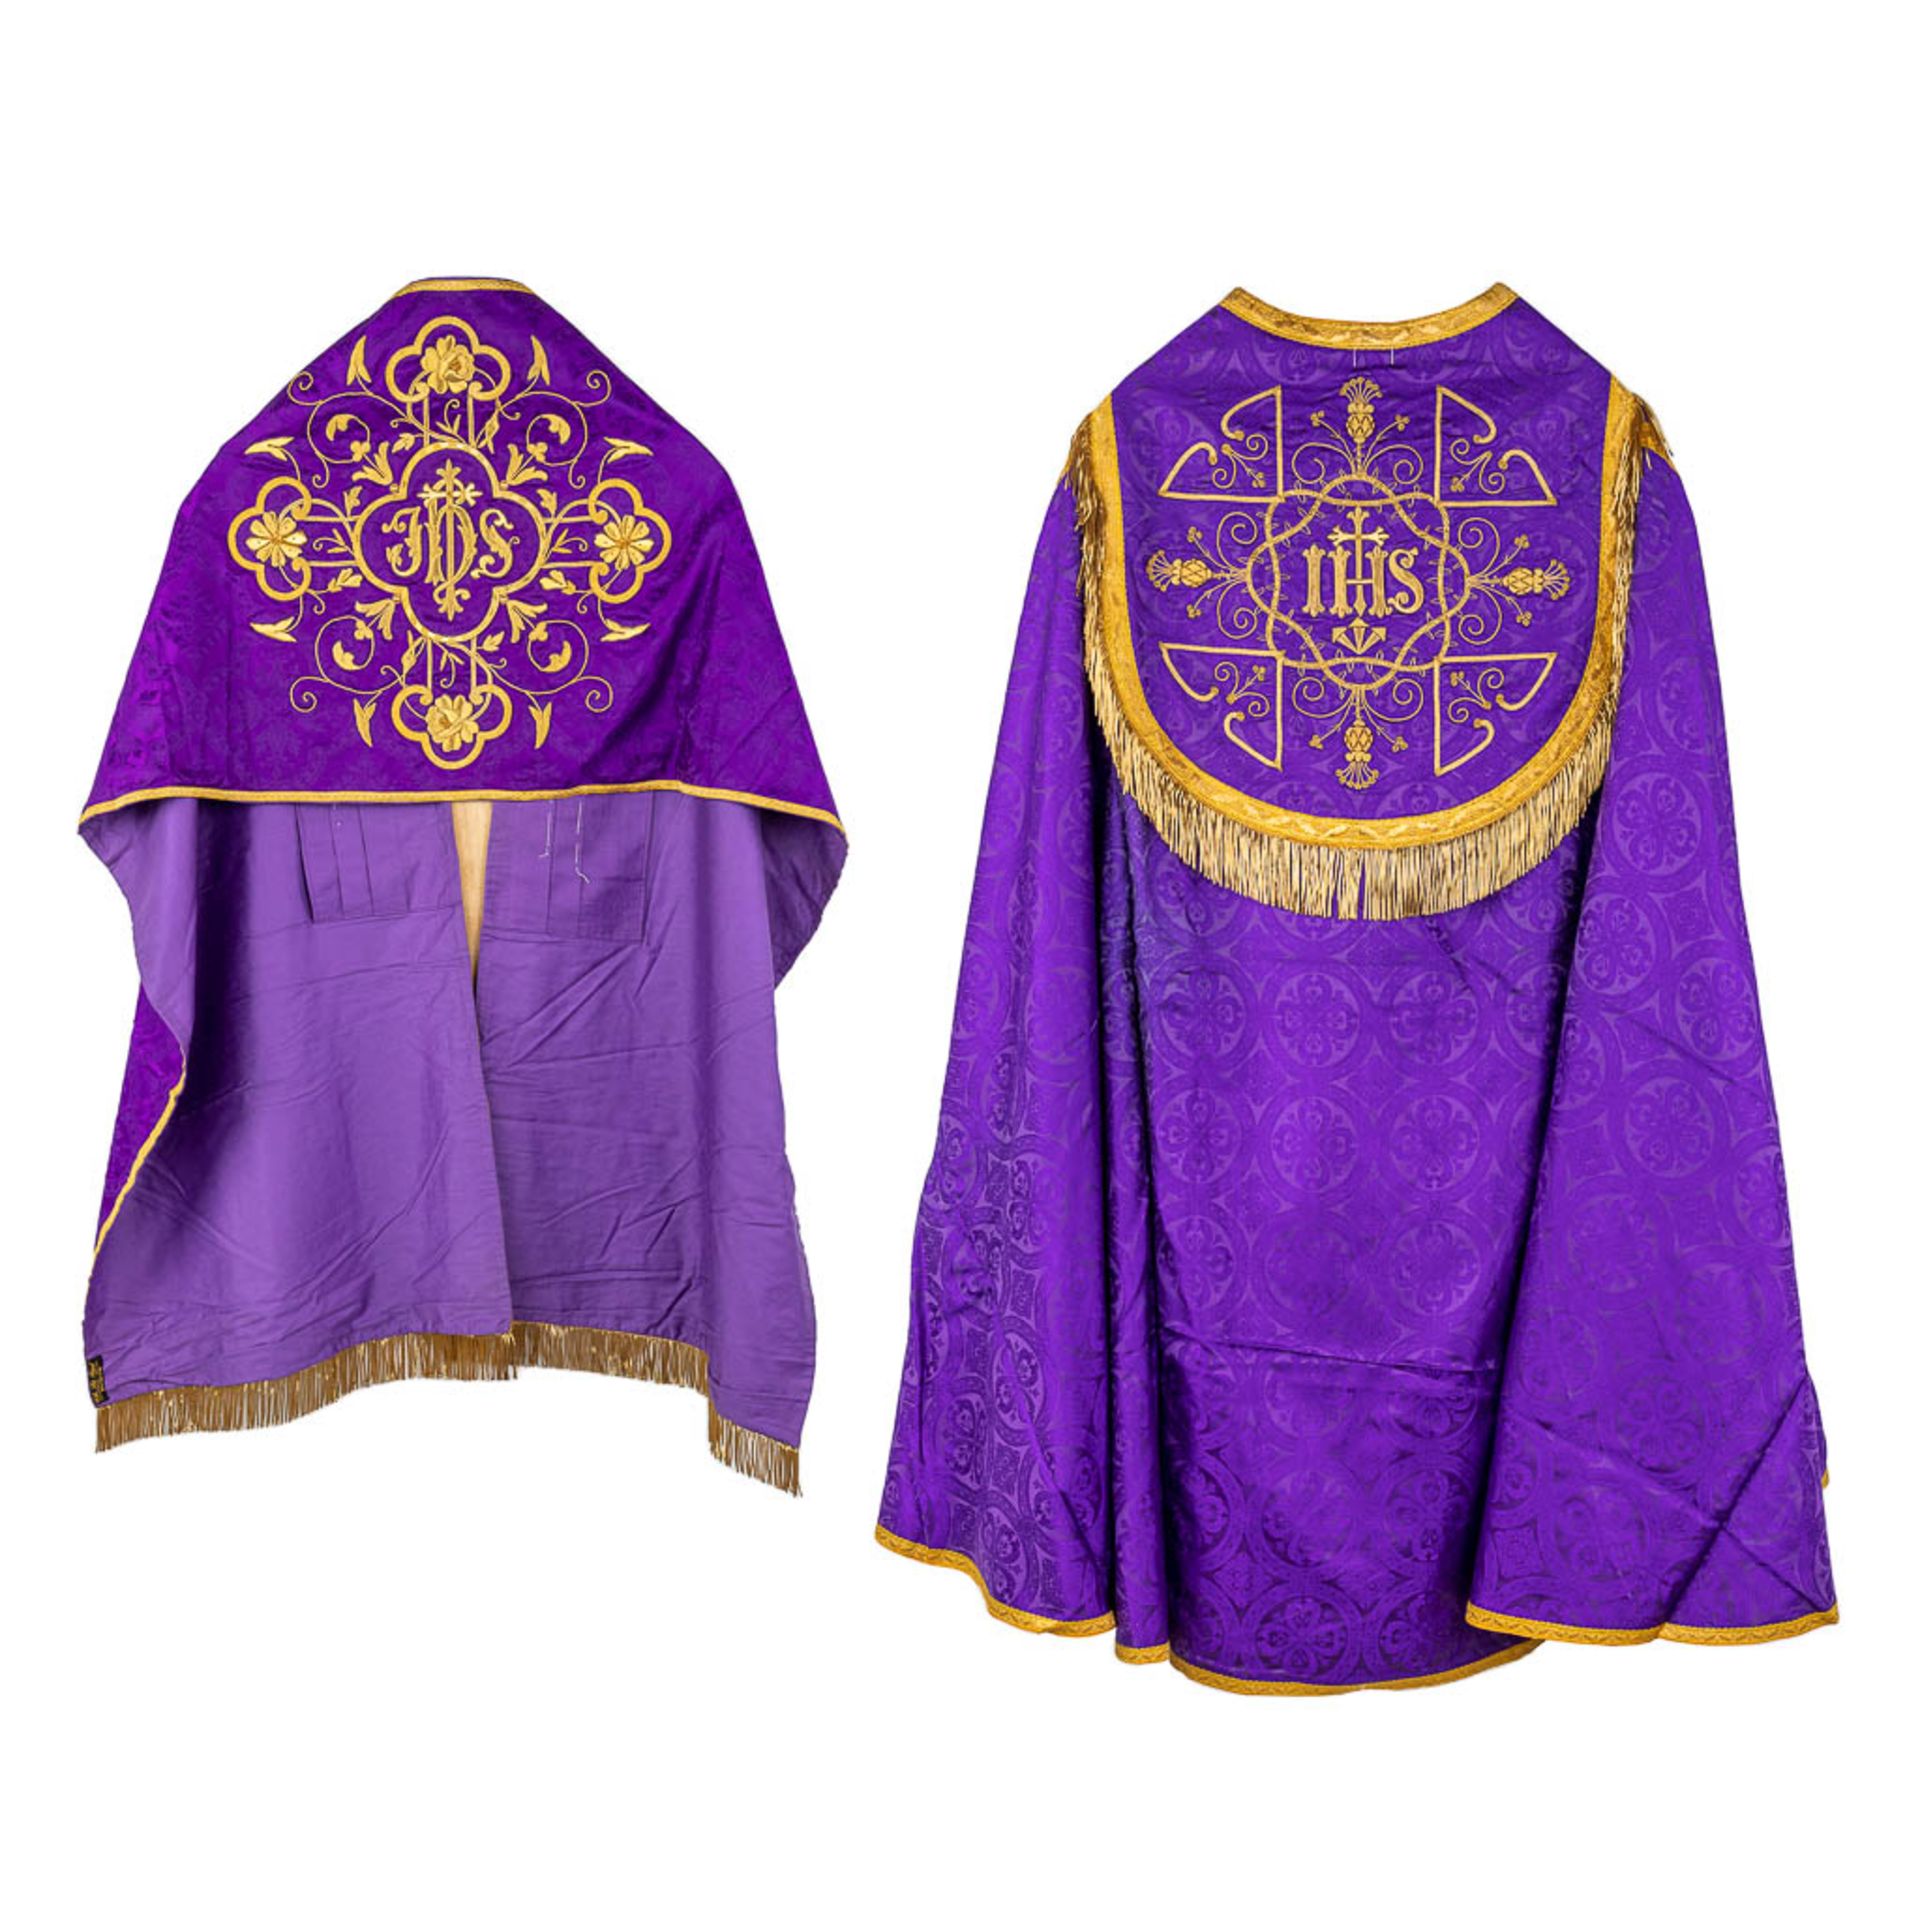 A Cope and Humeral Veil, finished with thick gold thread and purple fabric and the IHS logo.